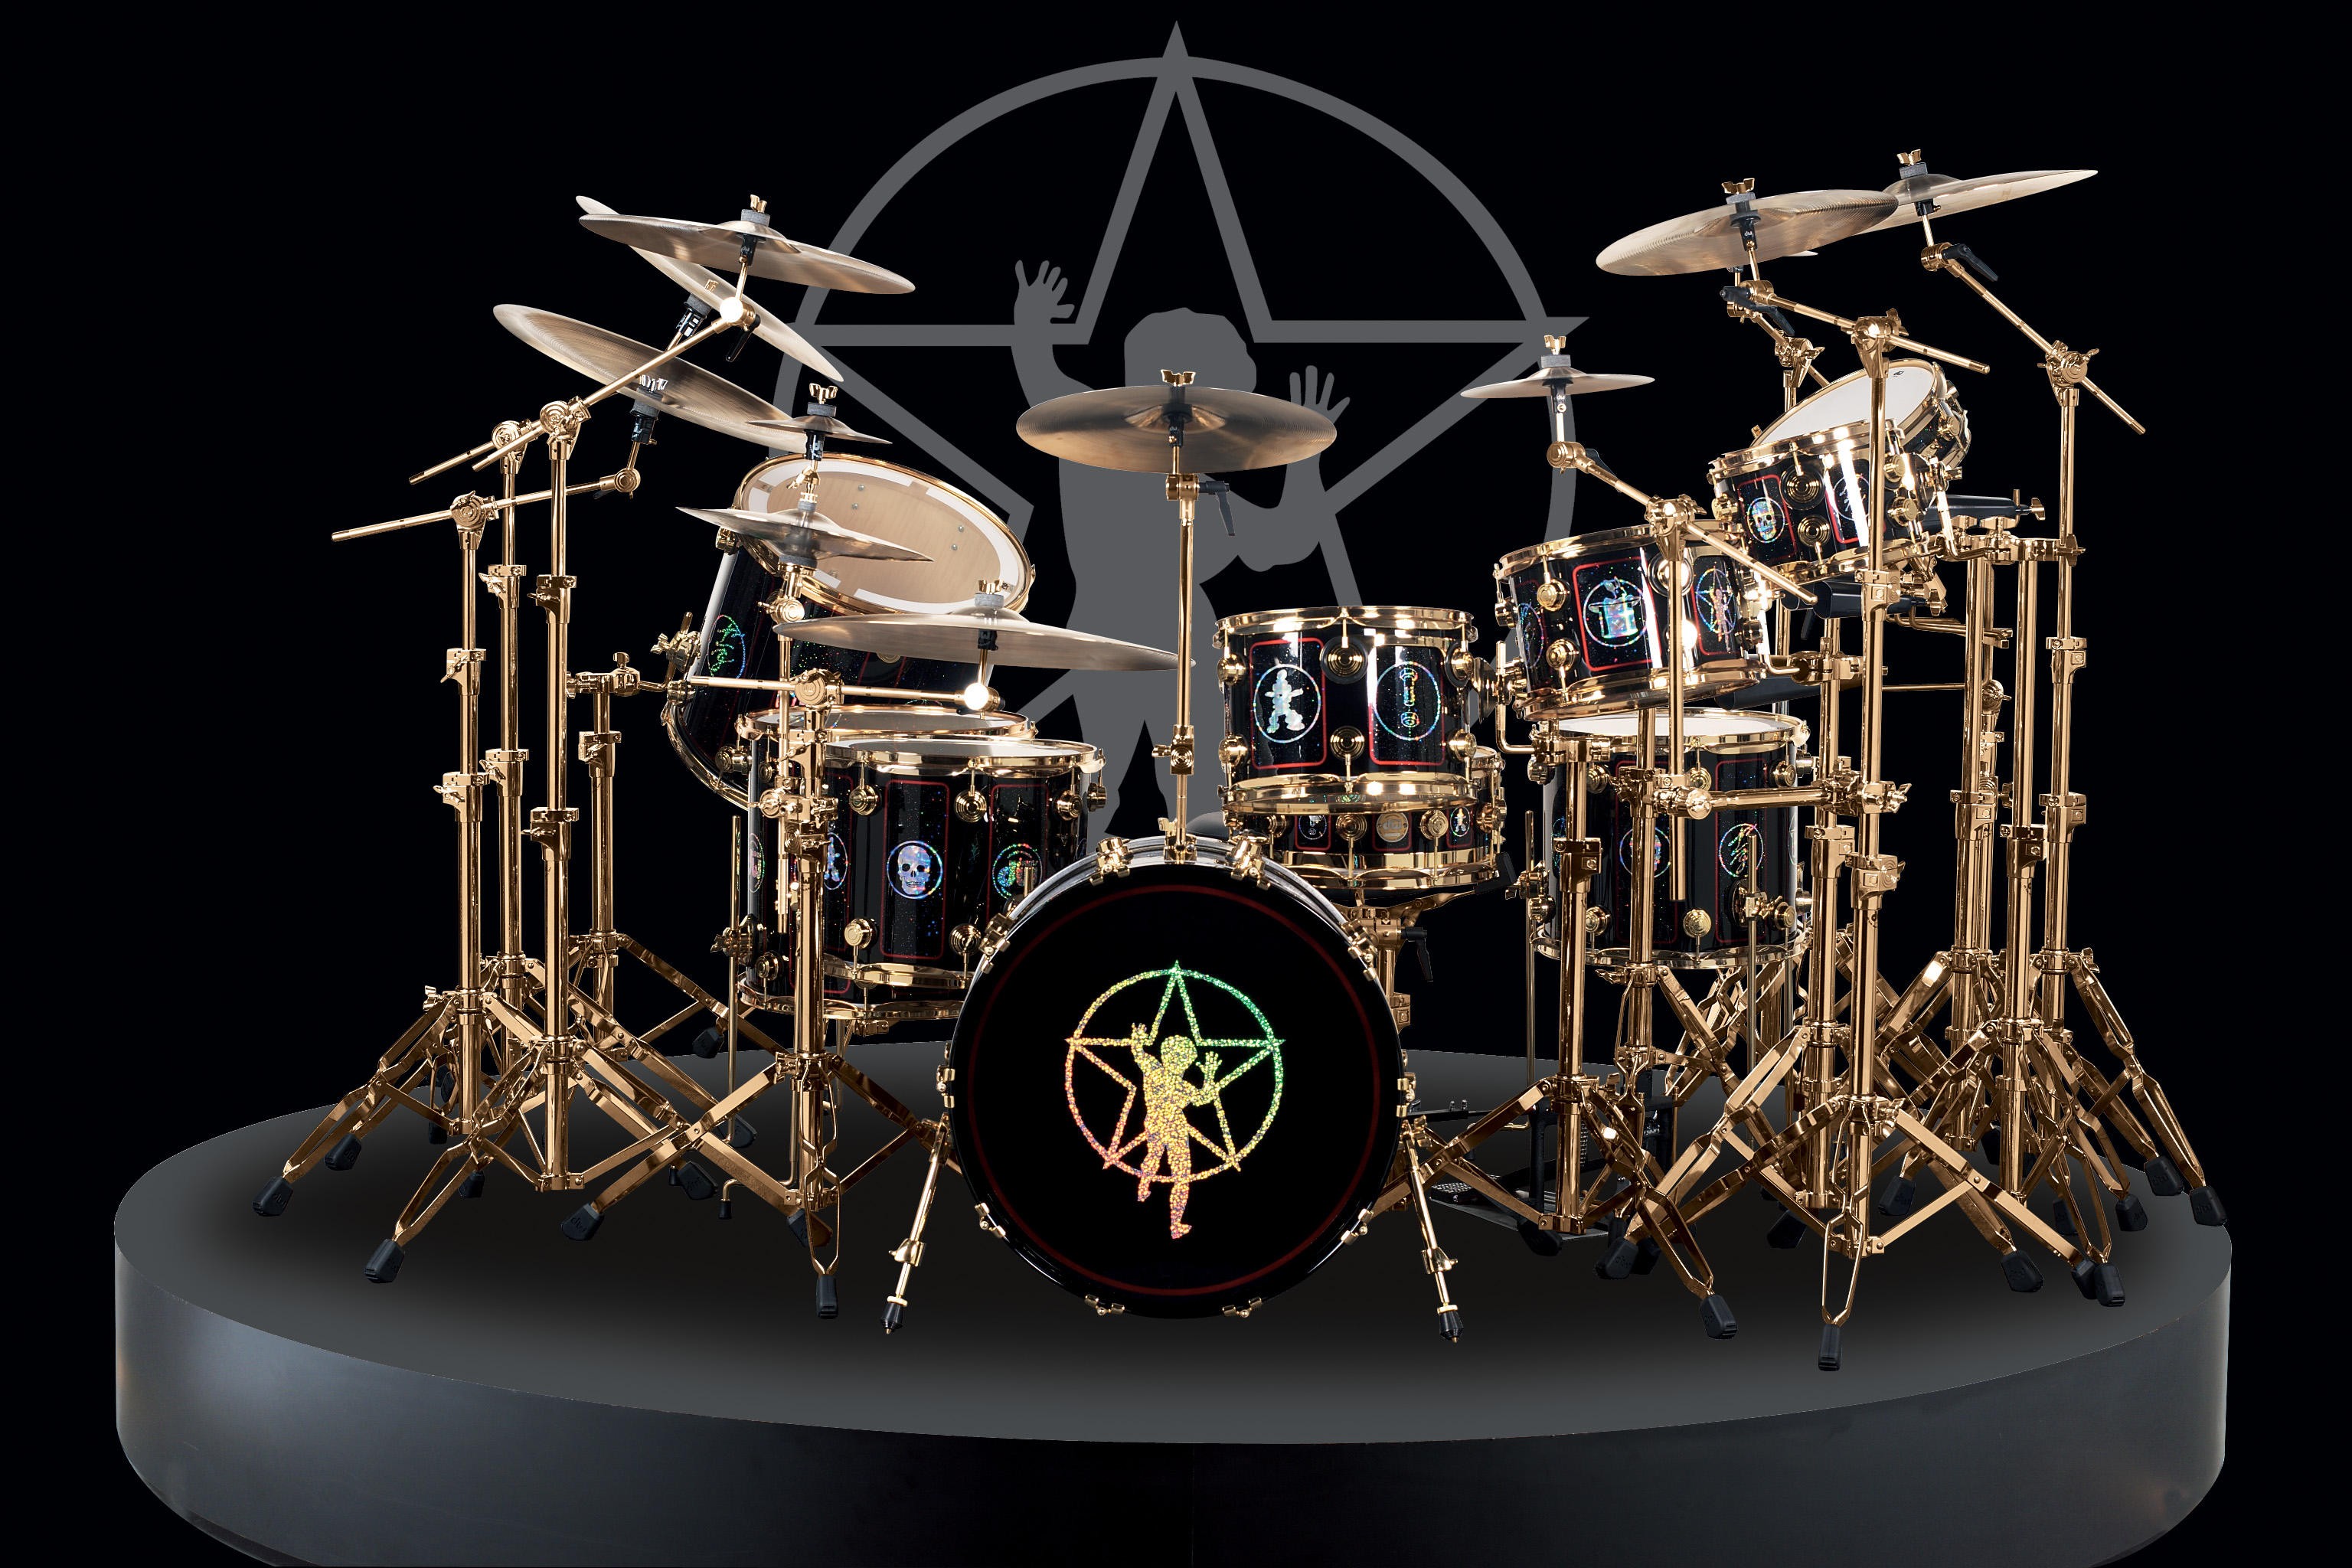 General 3072x2048 rush drums musical instrument music black background